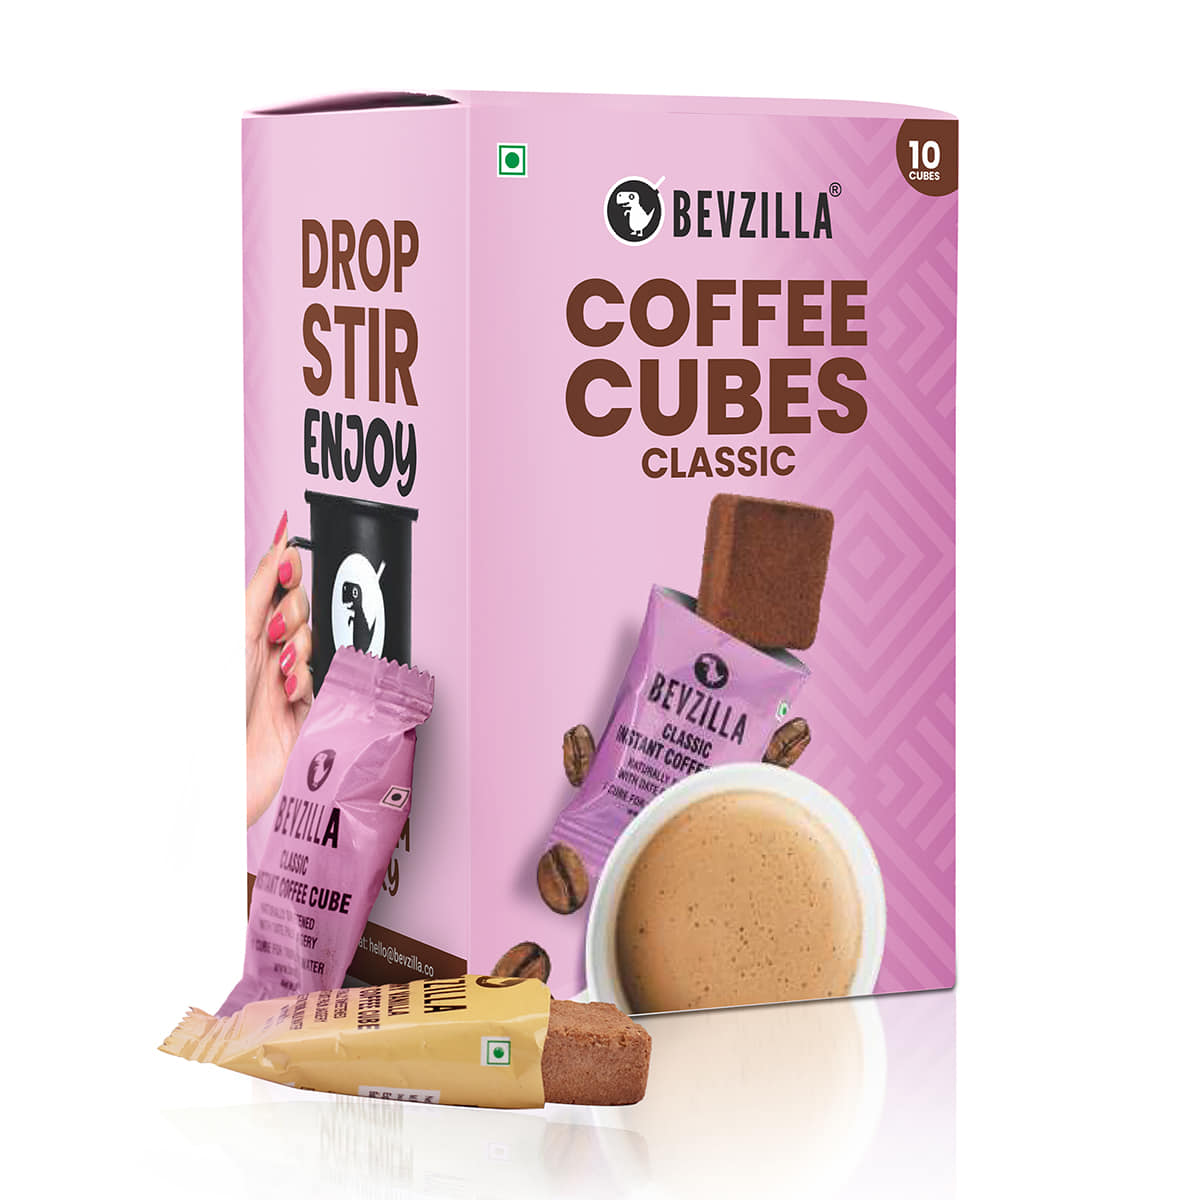 Classic Coffee Cubes